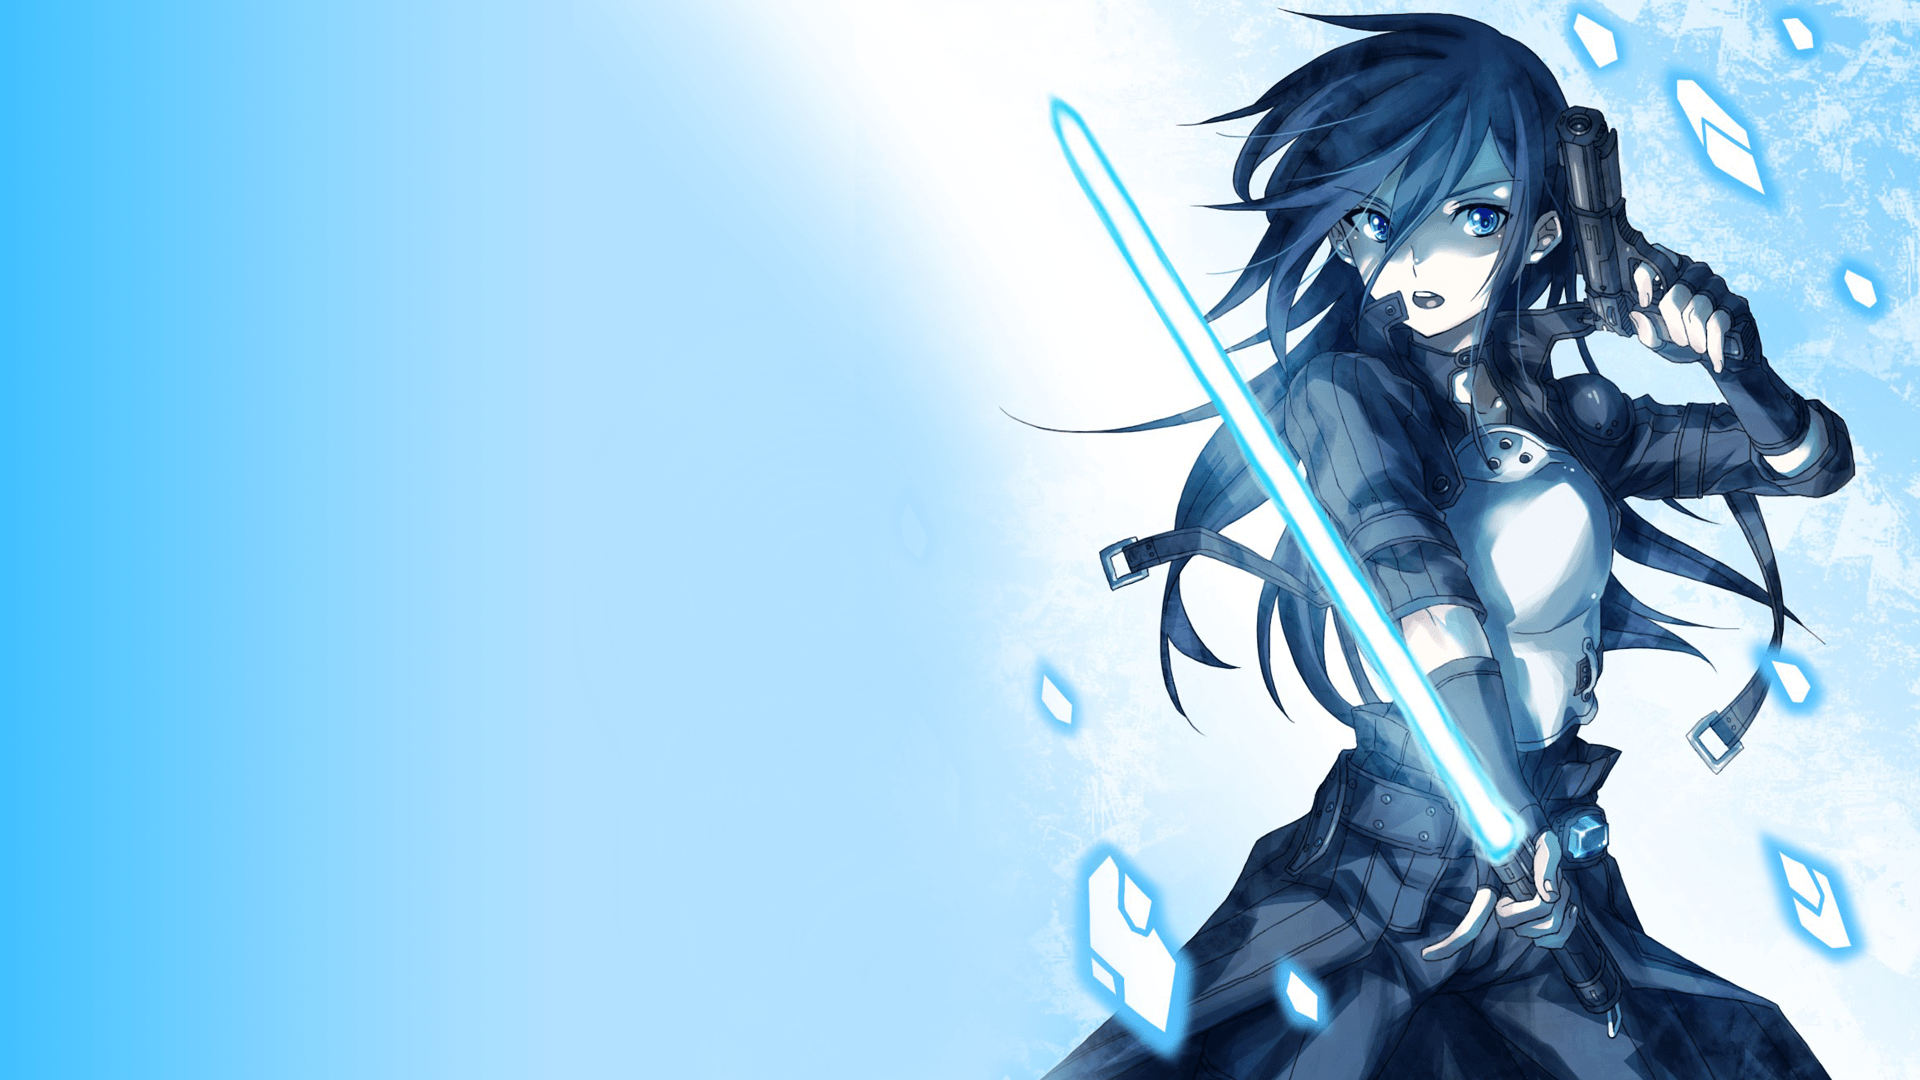 Free download tags anime blue sao image resolution x wallpaper with ImgStockscom [1920x1080] for your Desktop, Mobile & Tablet. Explore Blue Anime Wallpaper. Anime Wallpaper Sites, Cool Anime Wallpaper